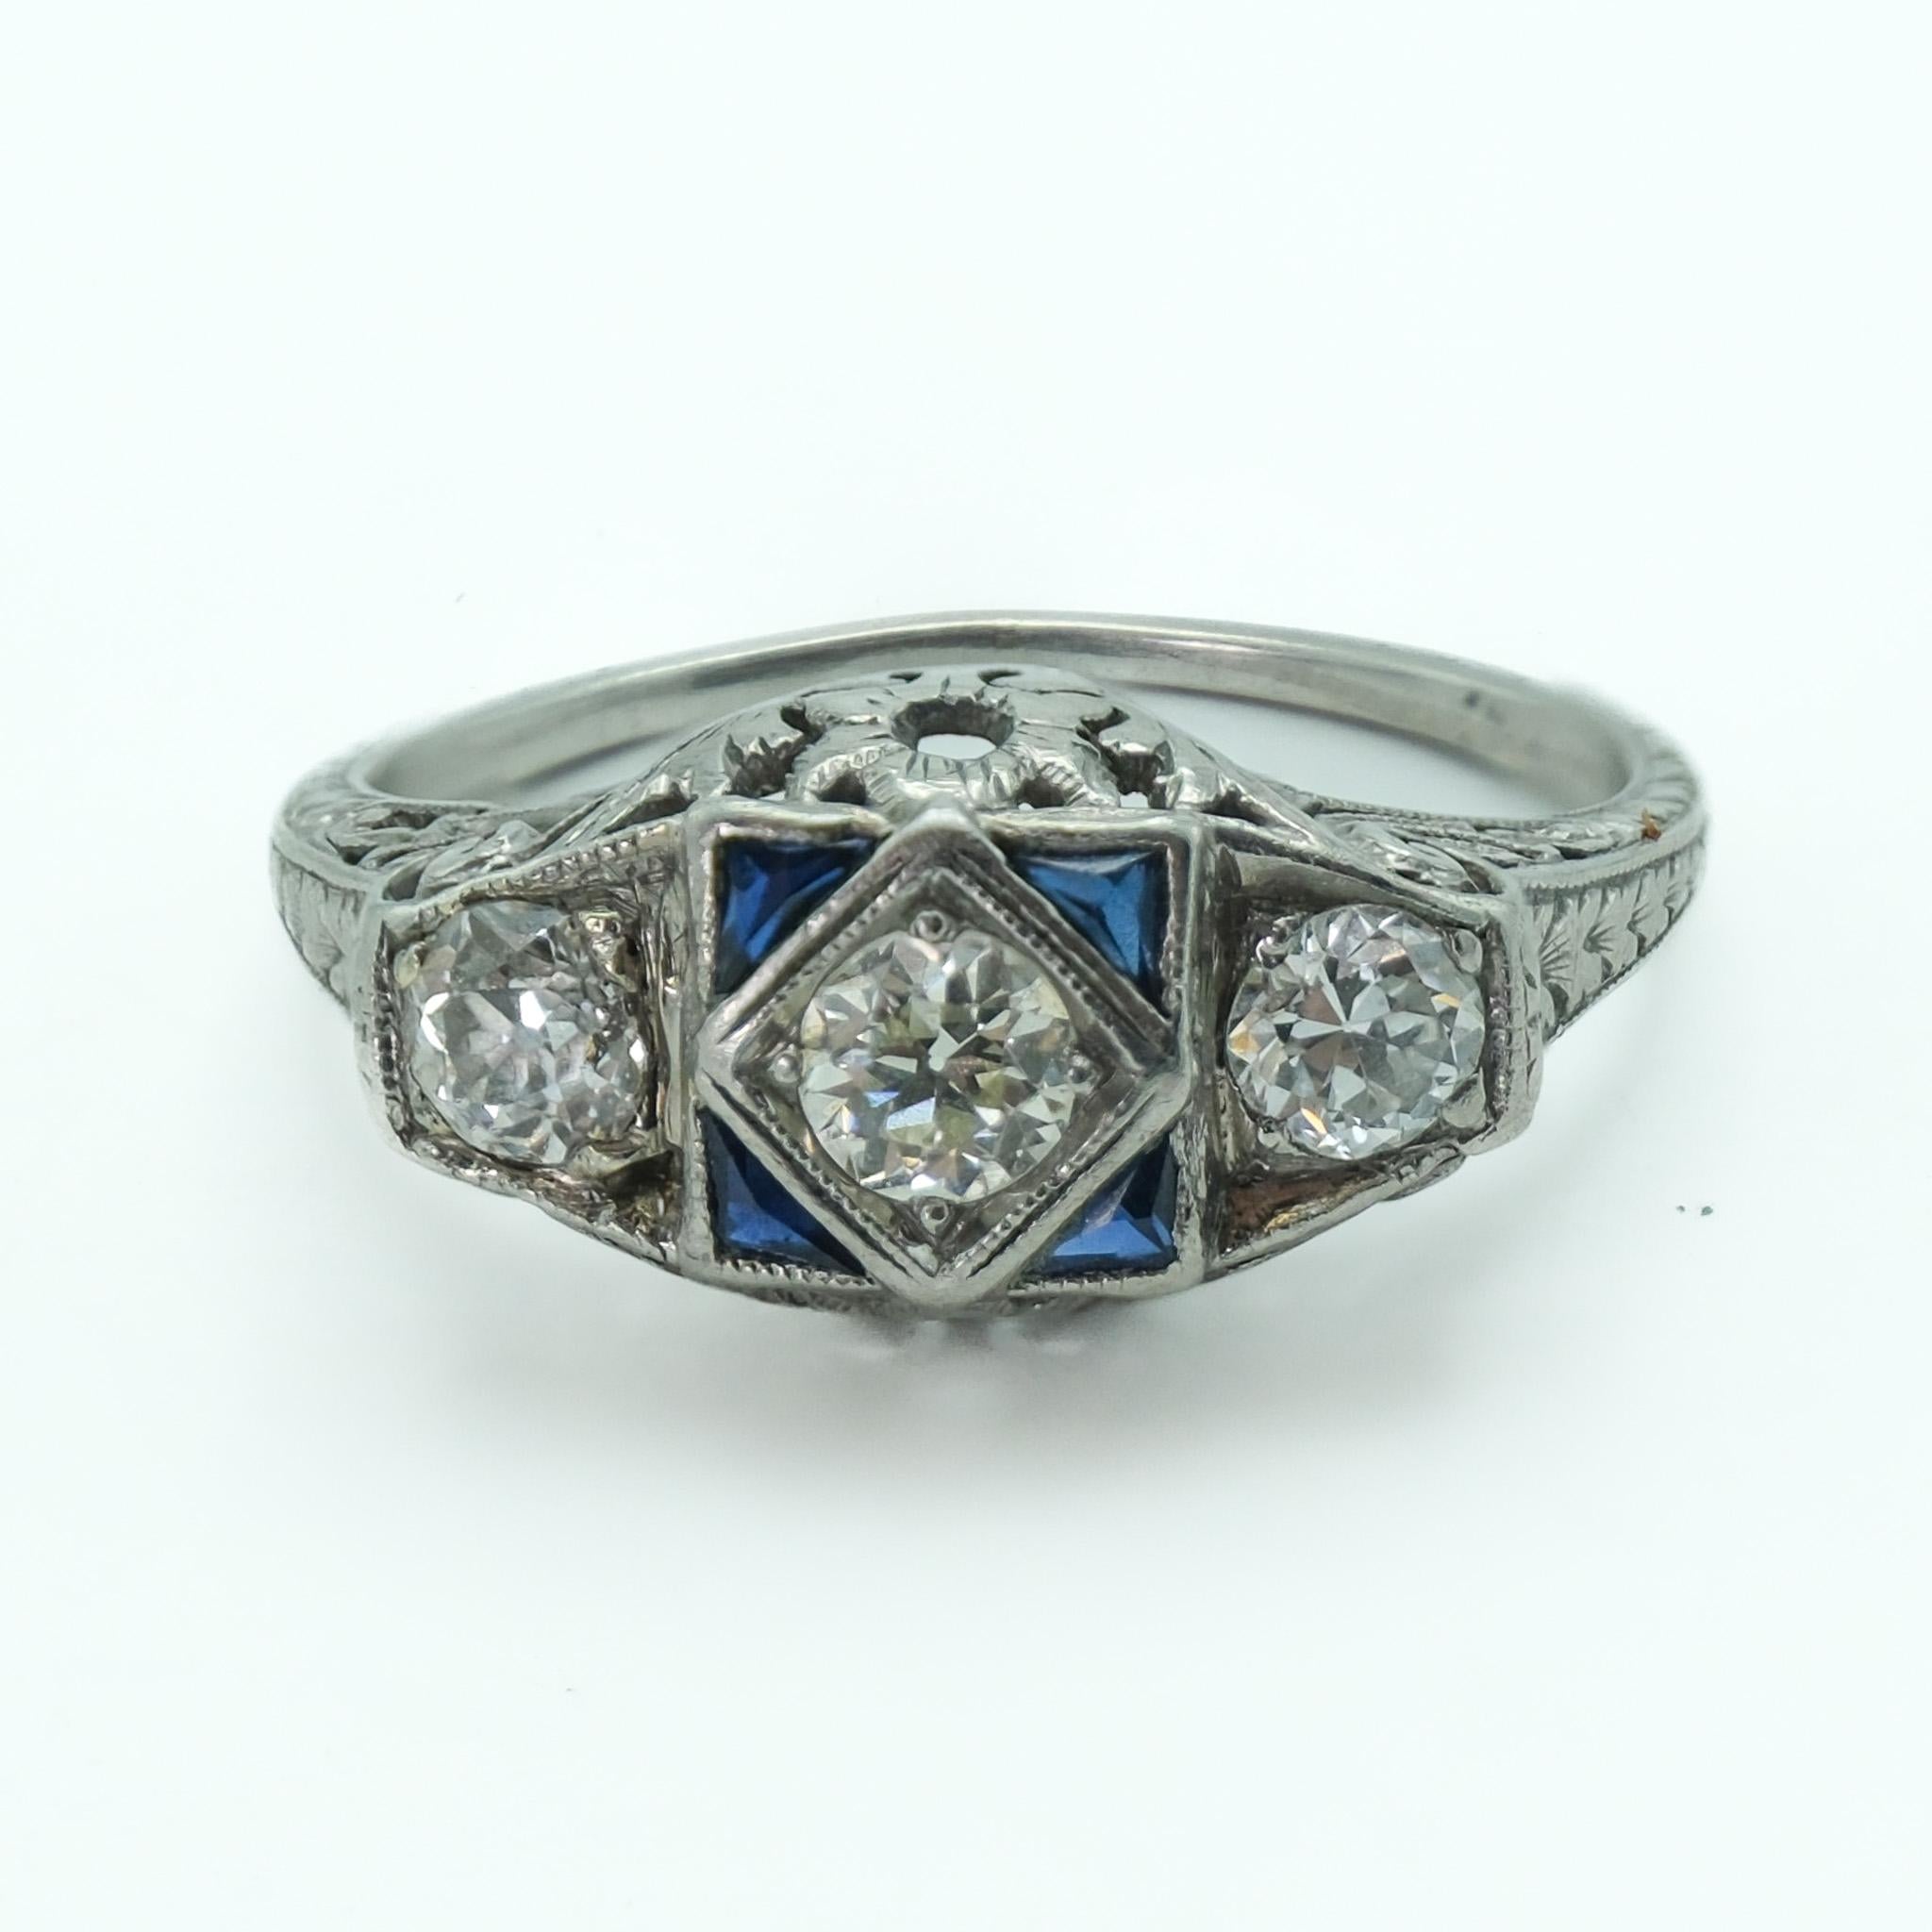 Beautiful handcrafted platinum art deco filligree three stone diamond and synthetic sapphire ring. This historic ring was created circa 1920s and is in fine vintage condition. Carved on the sides with detailed scroll work adding a fine layer of